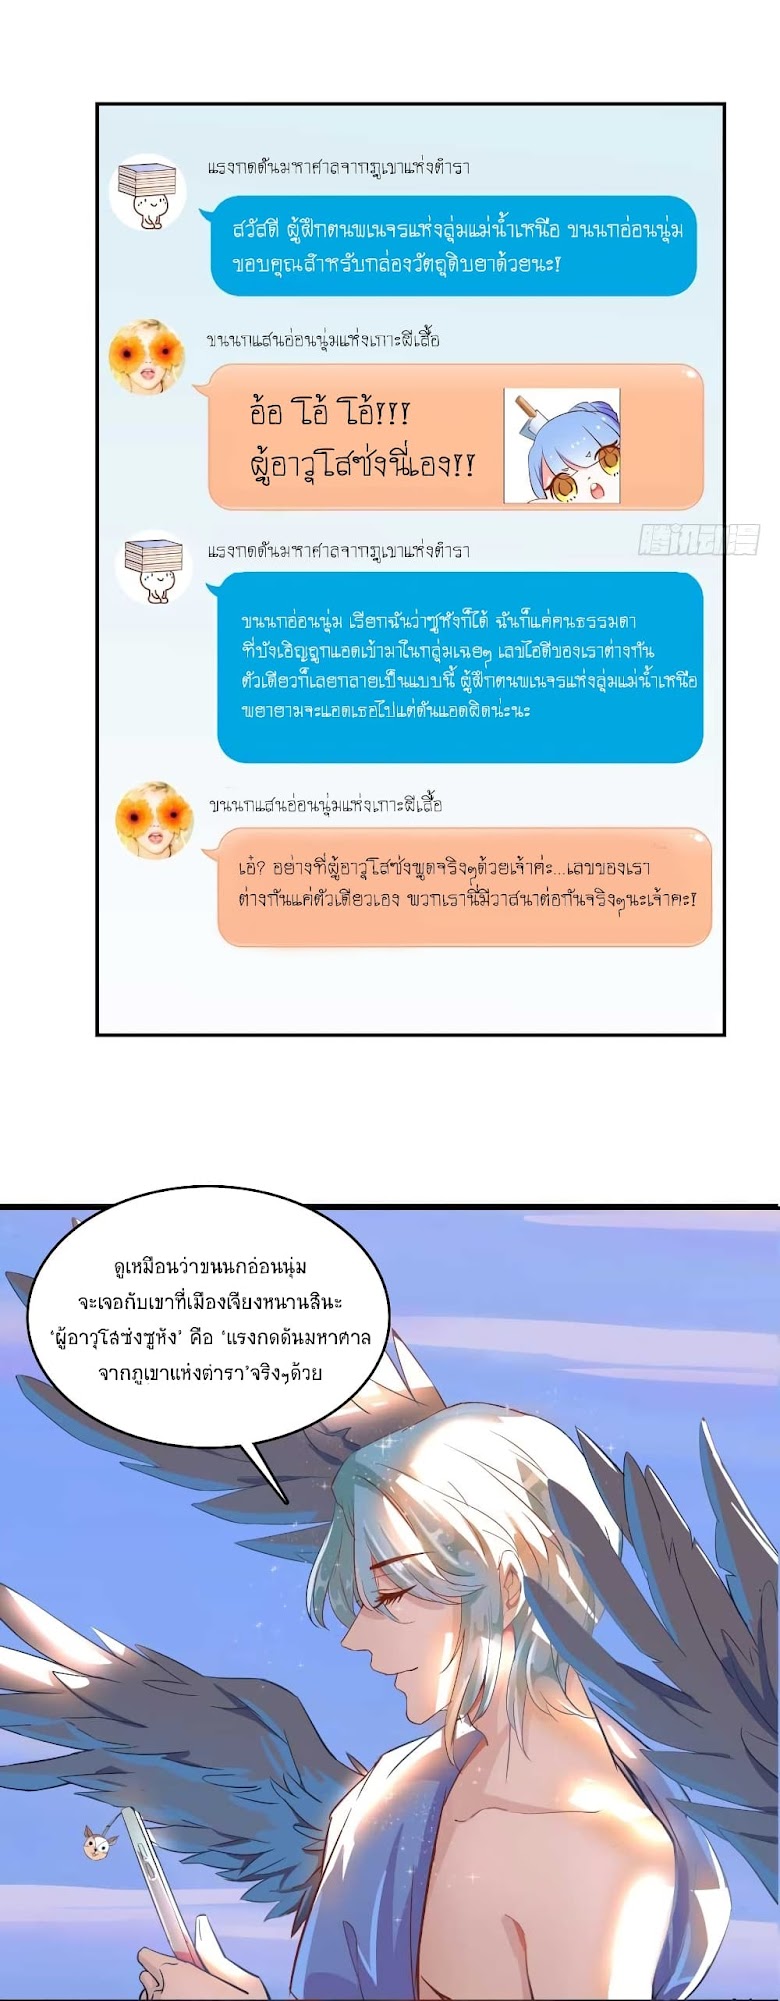 Cultivation Chat Group - หน้า 15